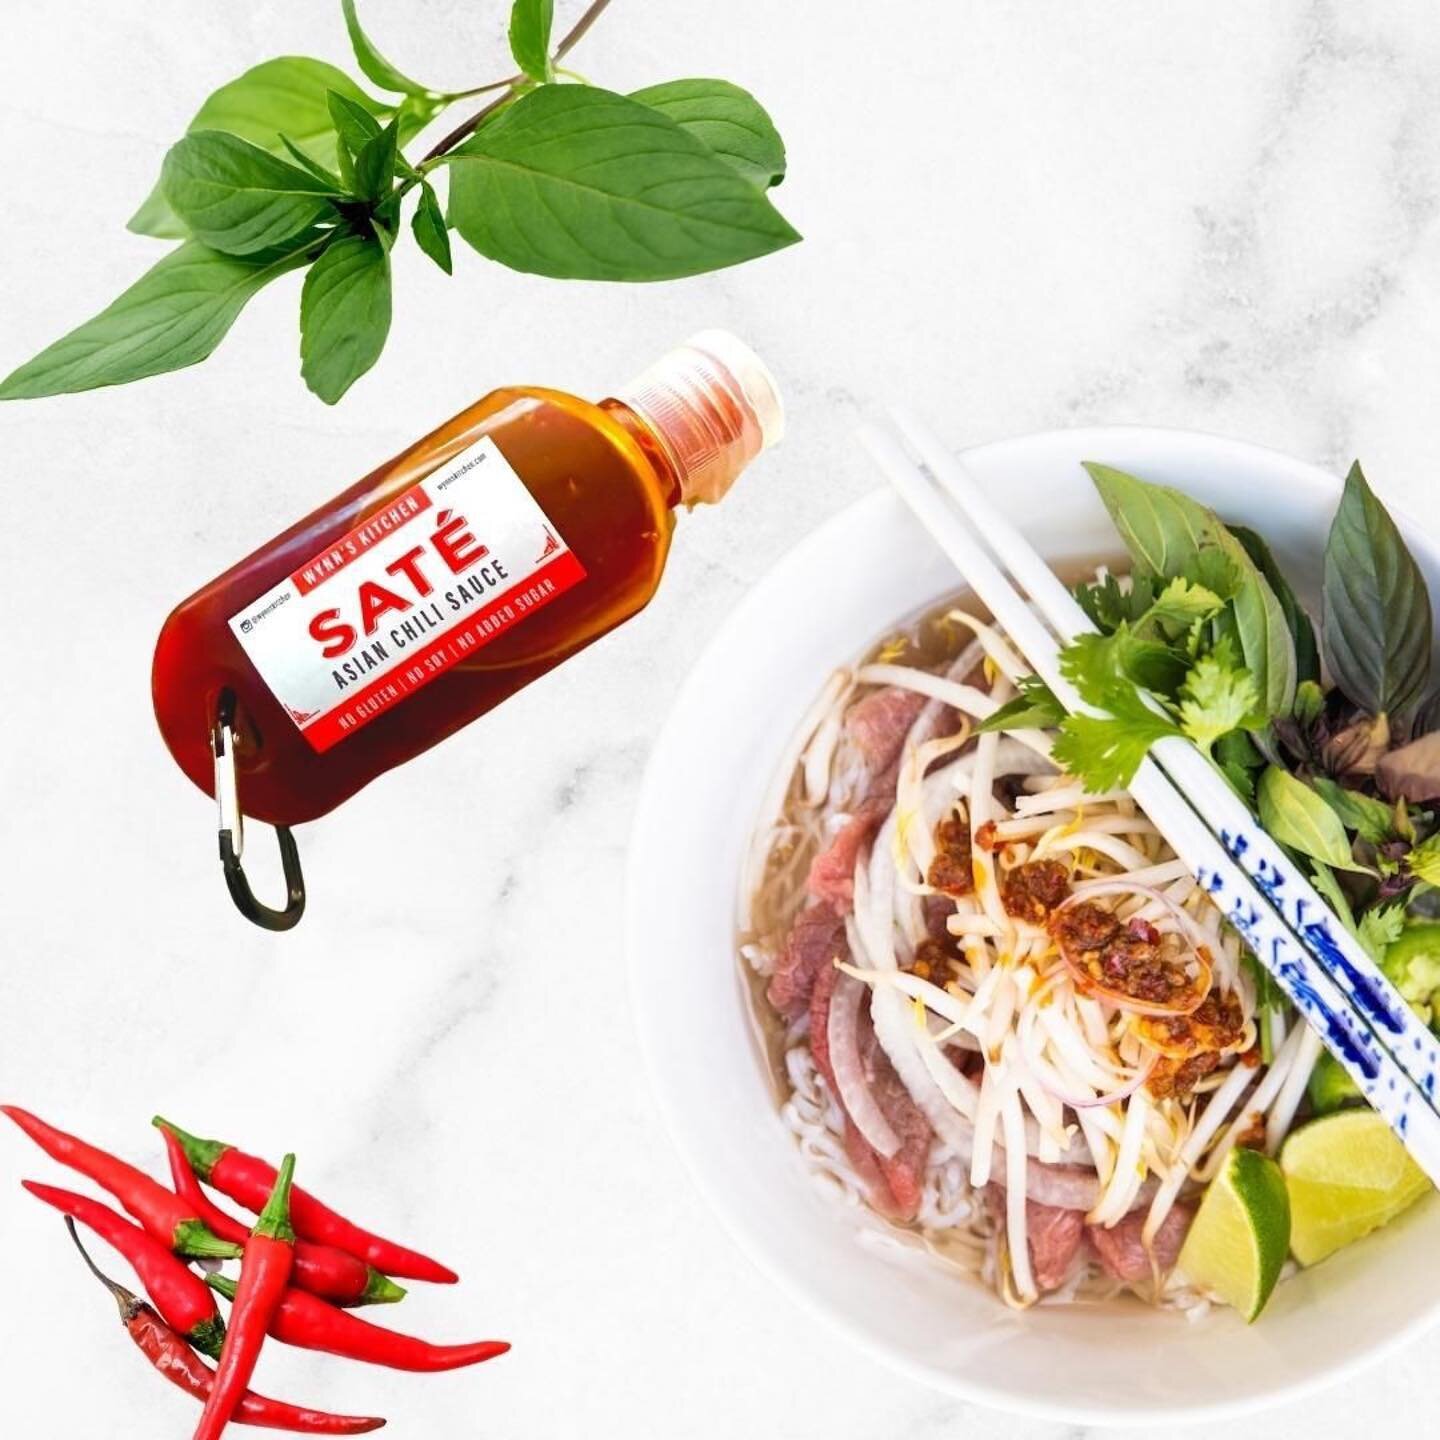 Cute little Sat&eacute; to-go keychain label I made to match @wynnskitchen &lsquo;s preexisting Asian Chili Sauce Sat&eacute; jar. I love mini versions of everything! 😍 

✨Ingredients: Grapeseed oil, shallots, jalape&ntilde;os, lime juice, garlic, d